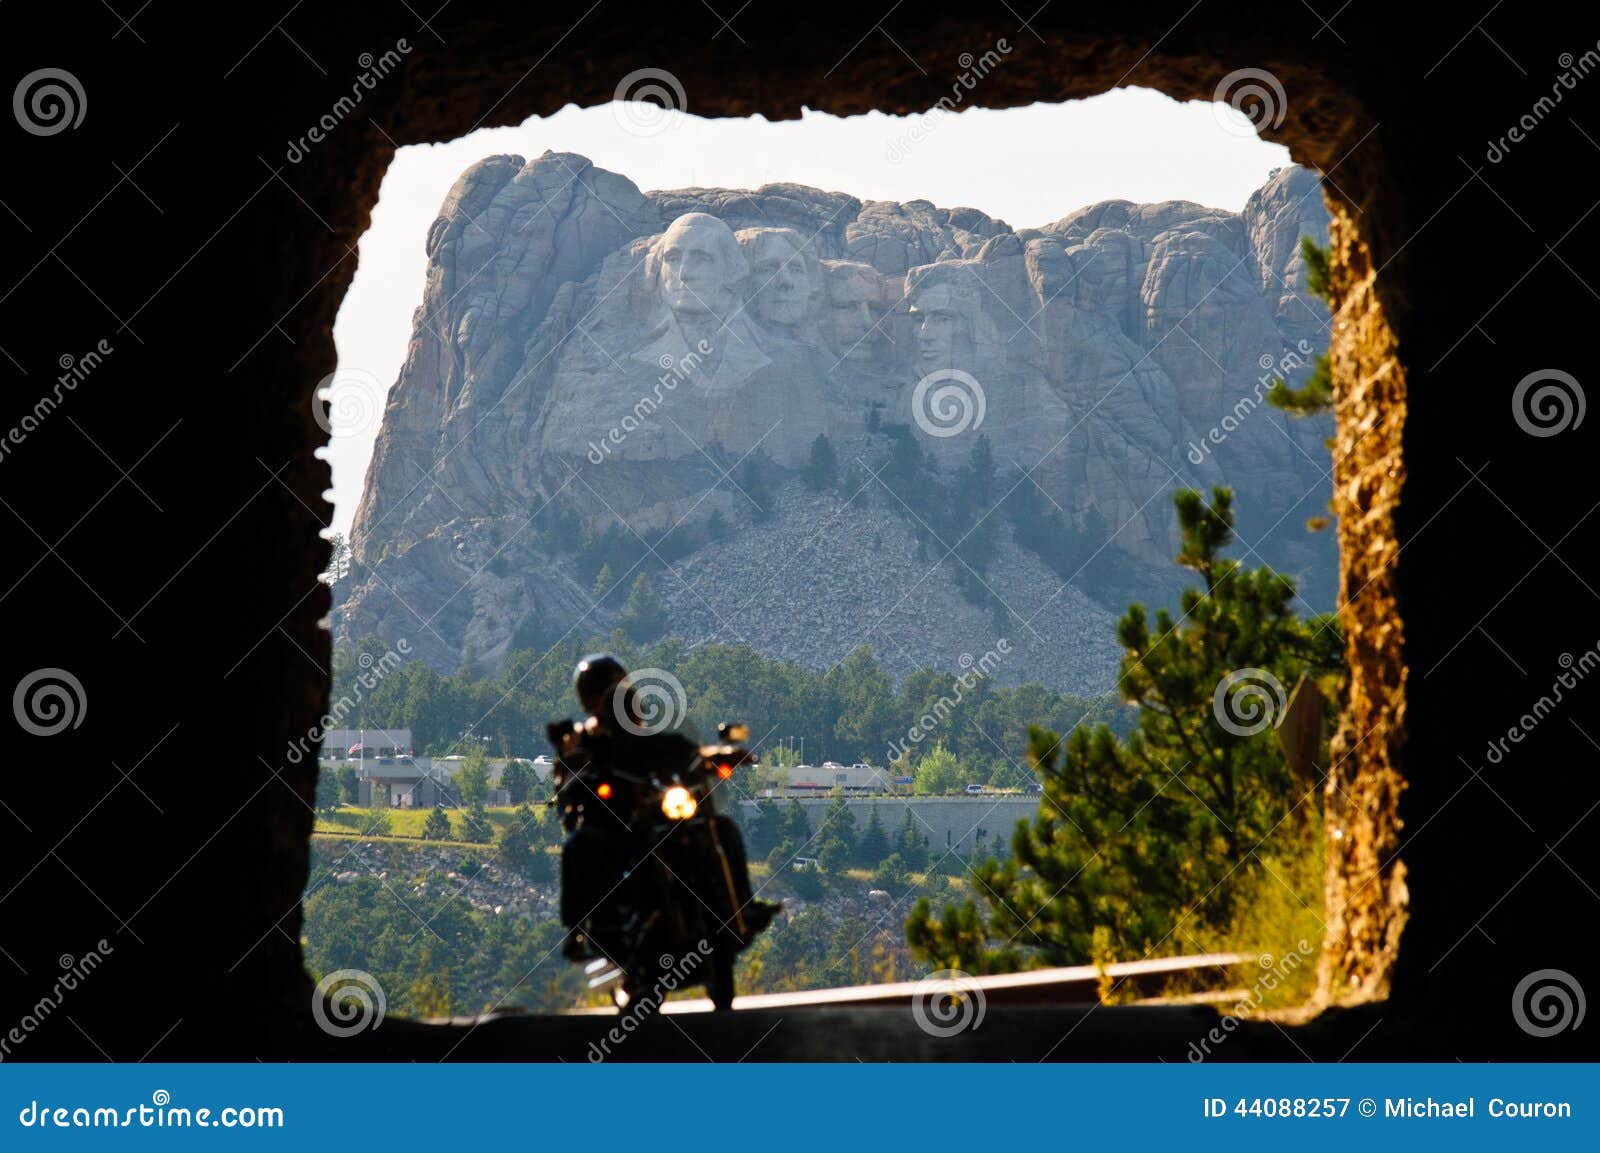 mount rushmore through tunnel with riders